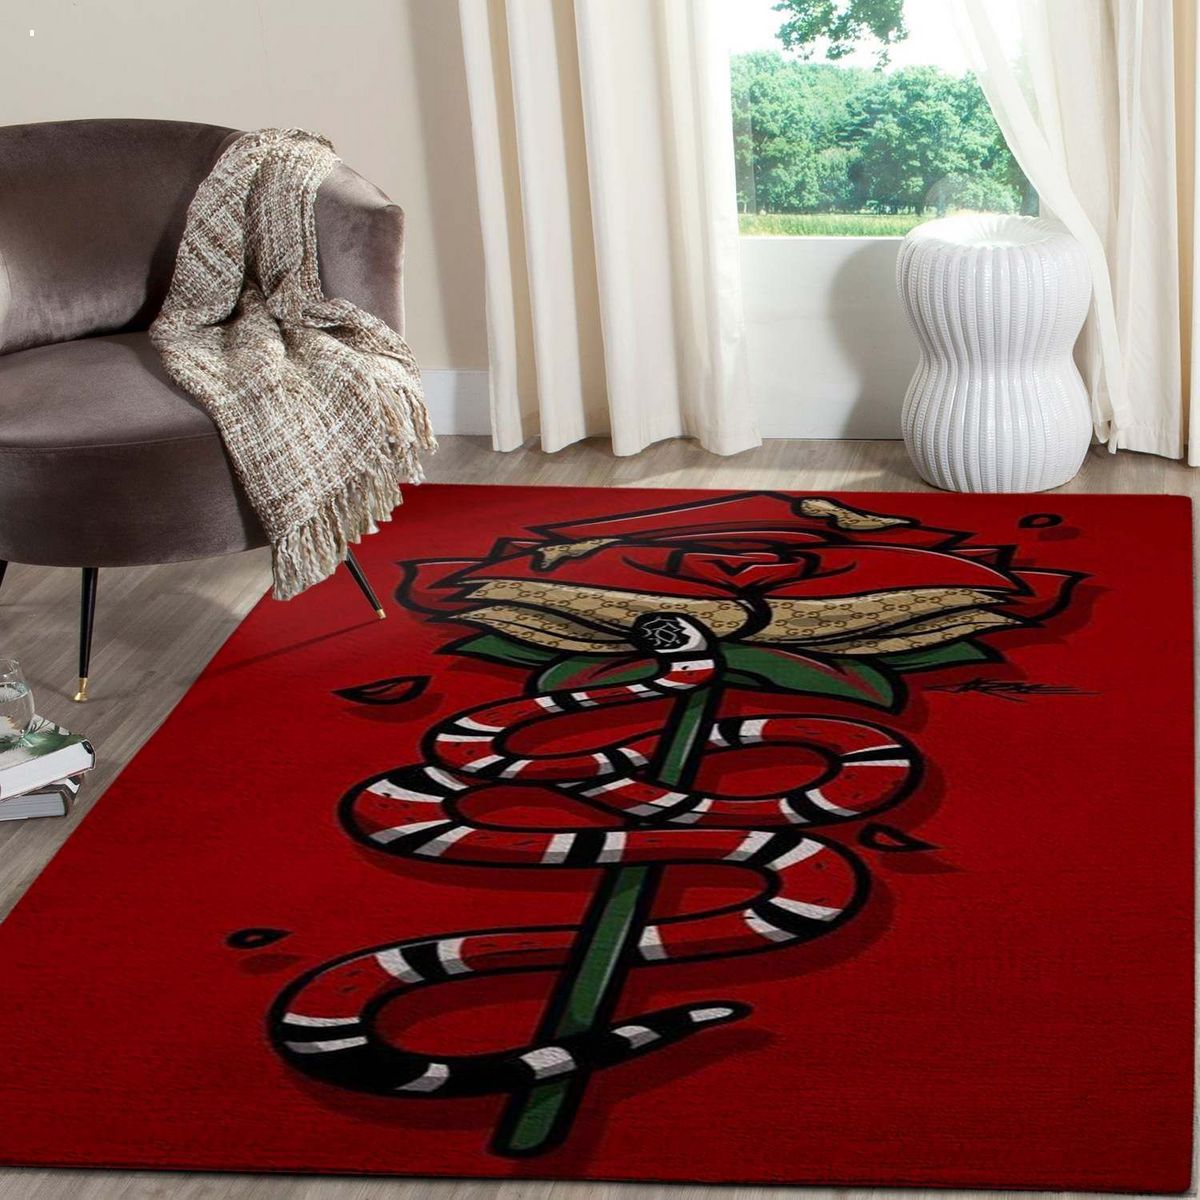 Gucci Red Snake Luxury Area Rug For Living Room Bedroom Carpet Home Limites Edition